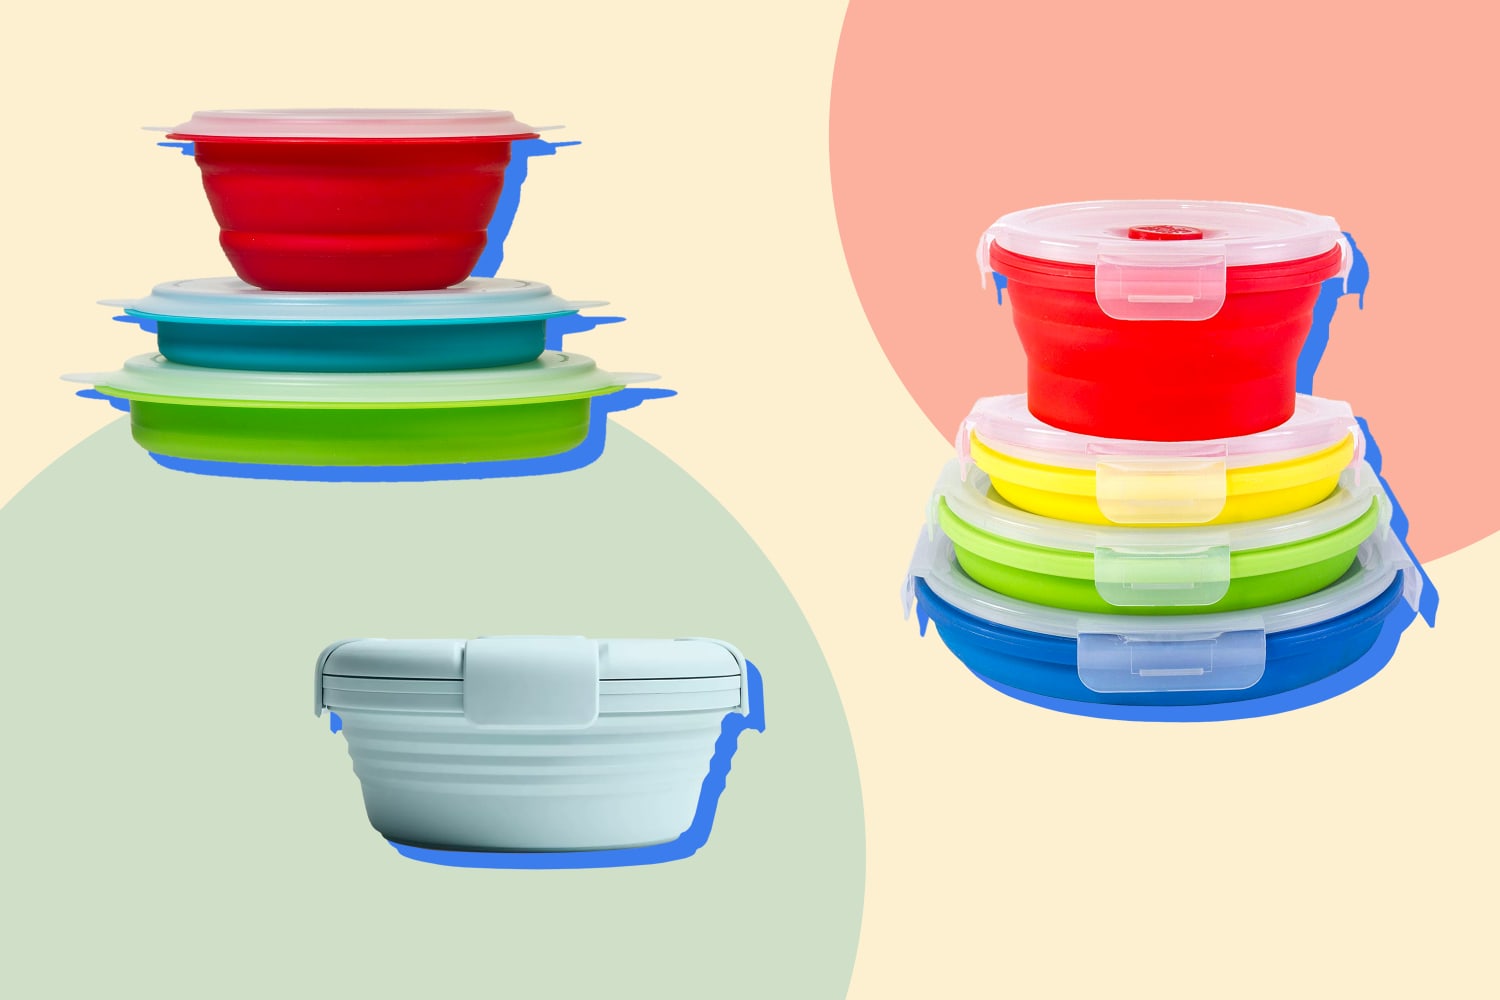 Best Collapsible Food Containers 2023